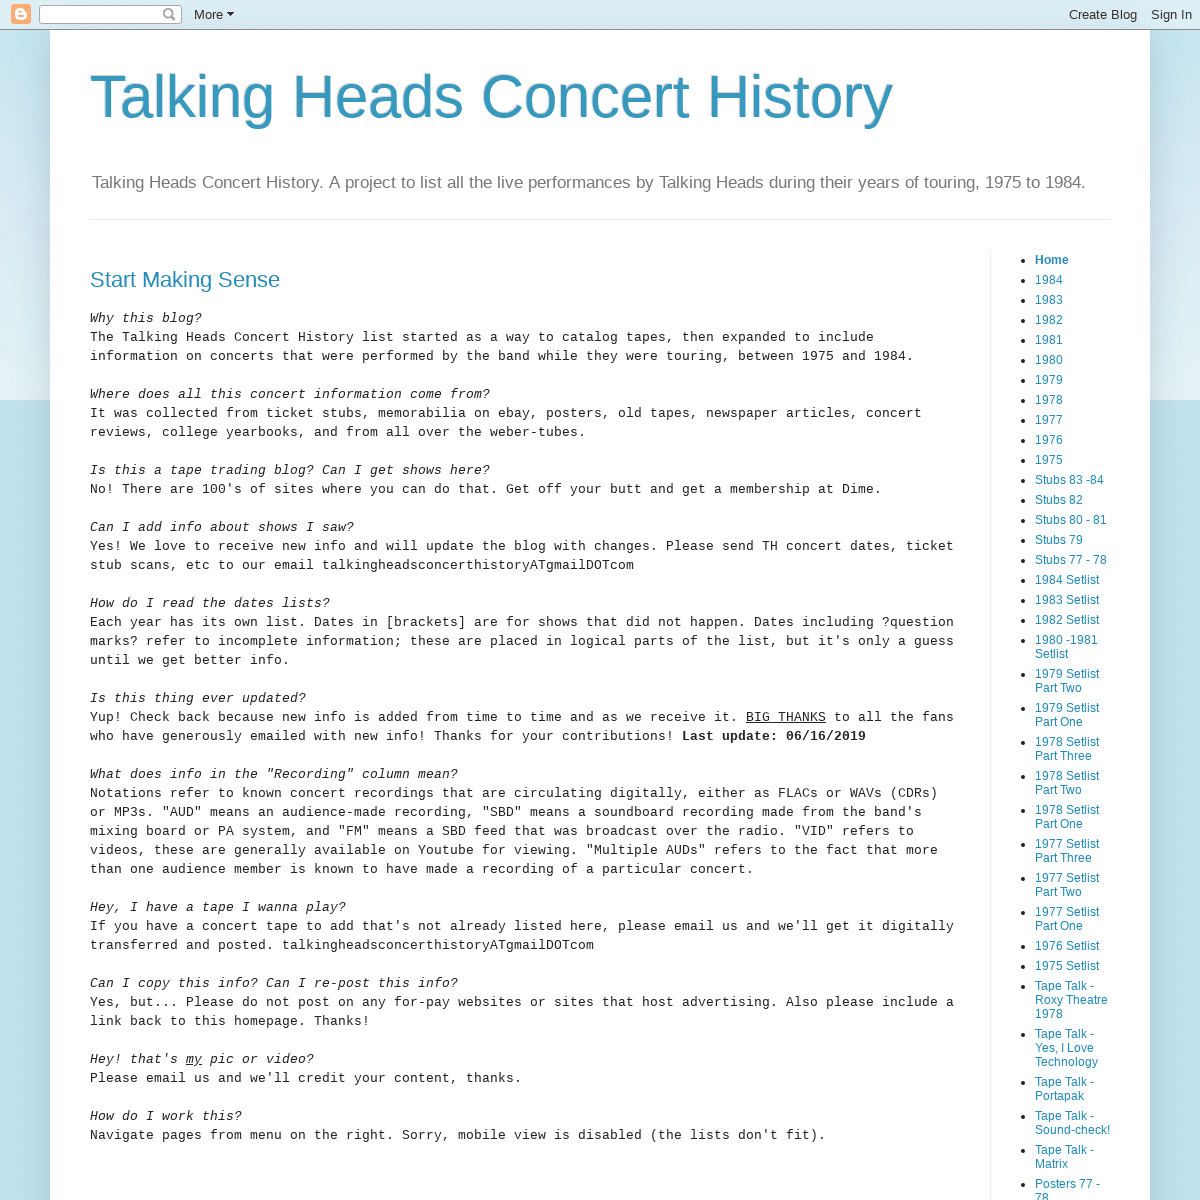 Talking Heads Concert History